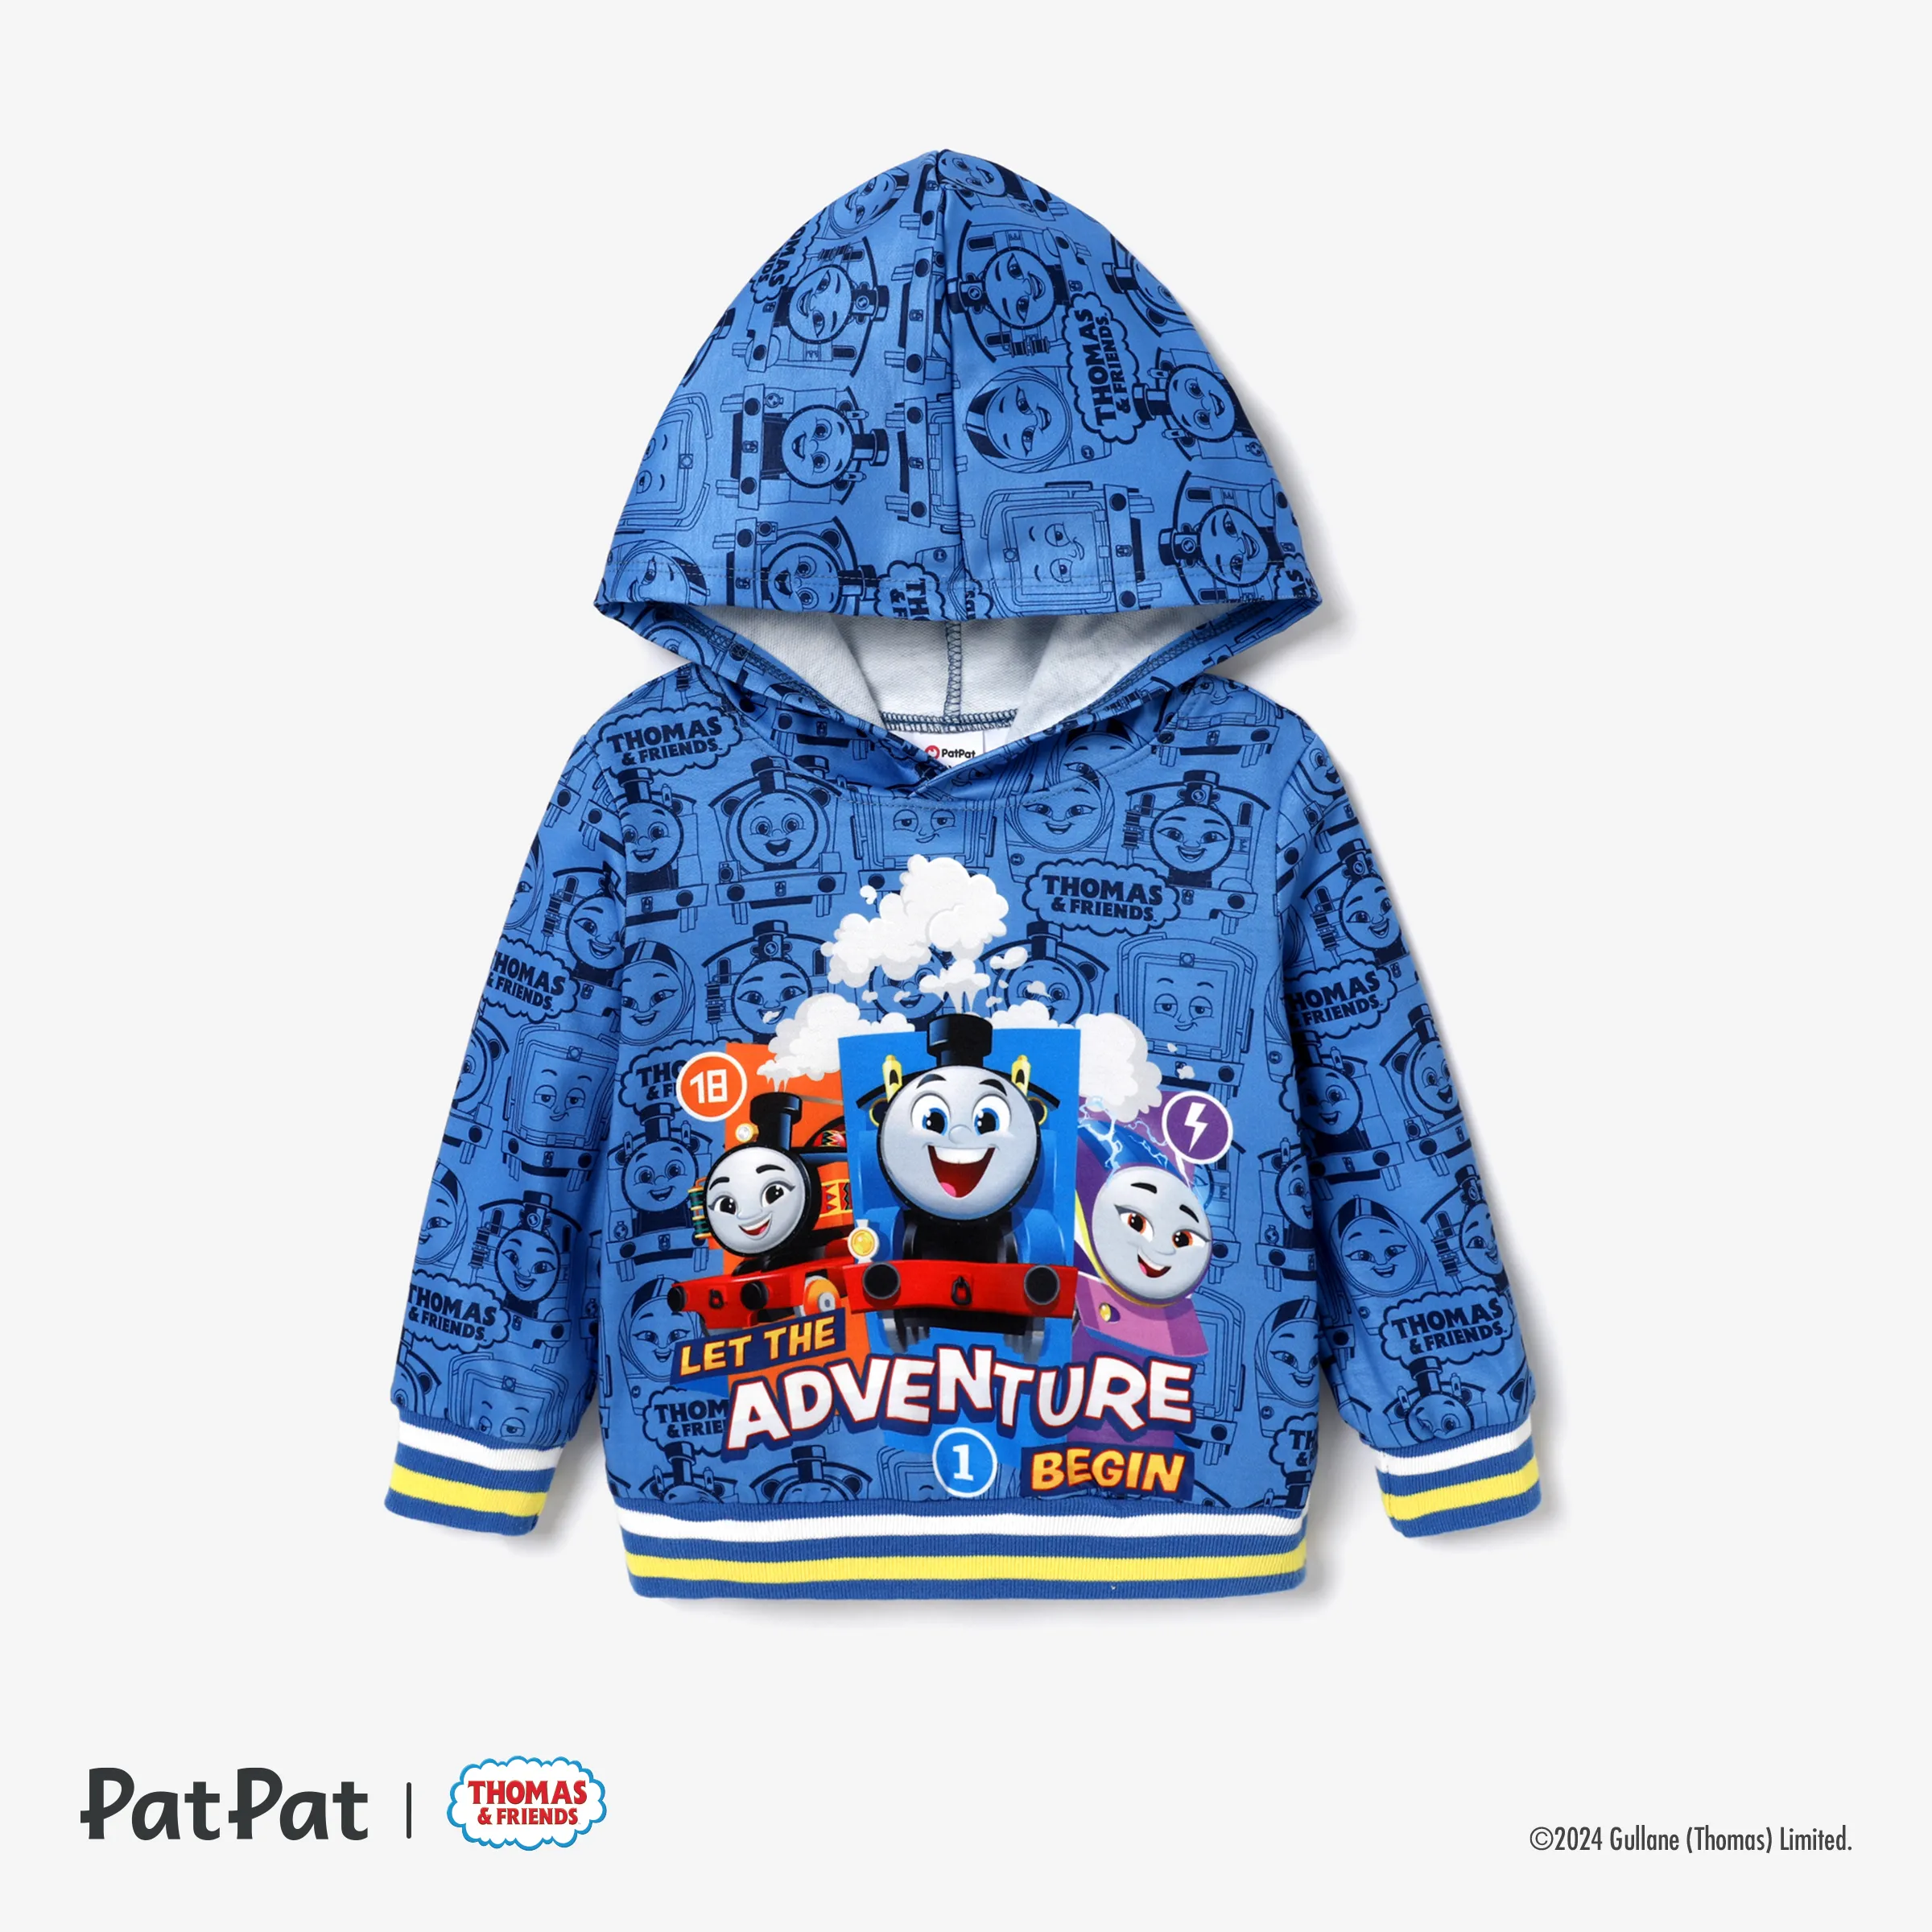 Thomas & Friends Toddler Boys Long-sleeve Hooded Top